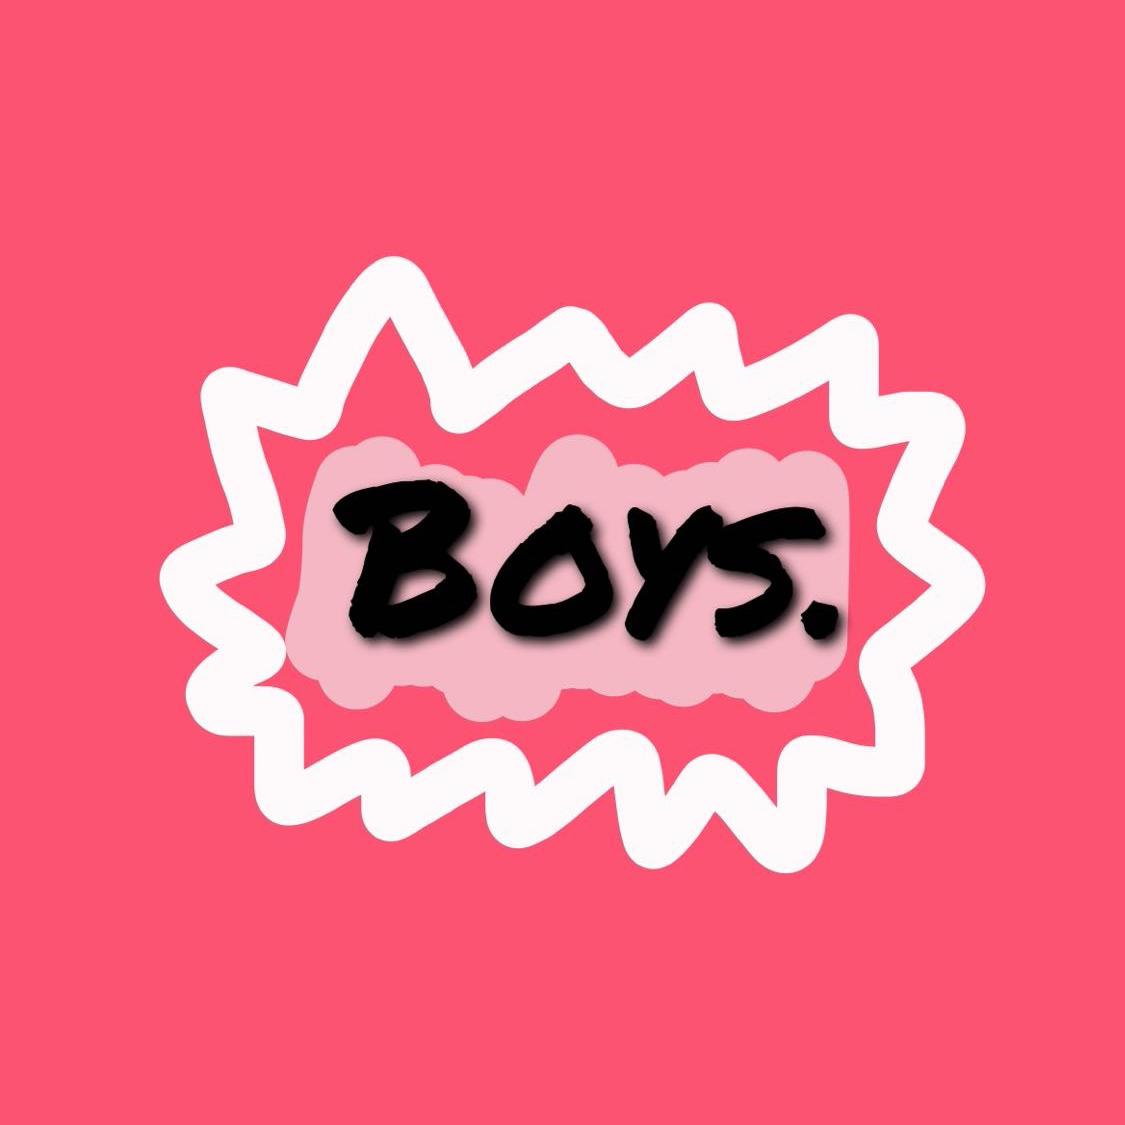 boys. 's images